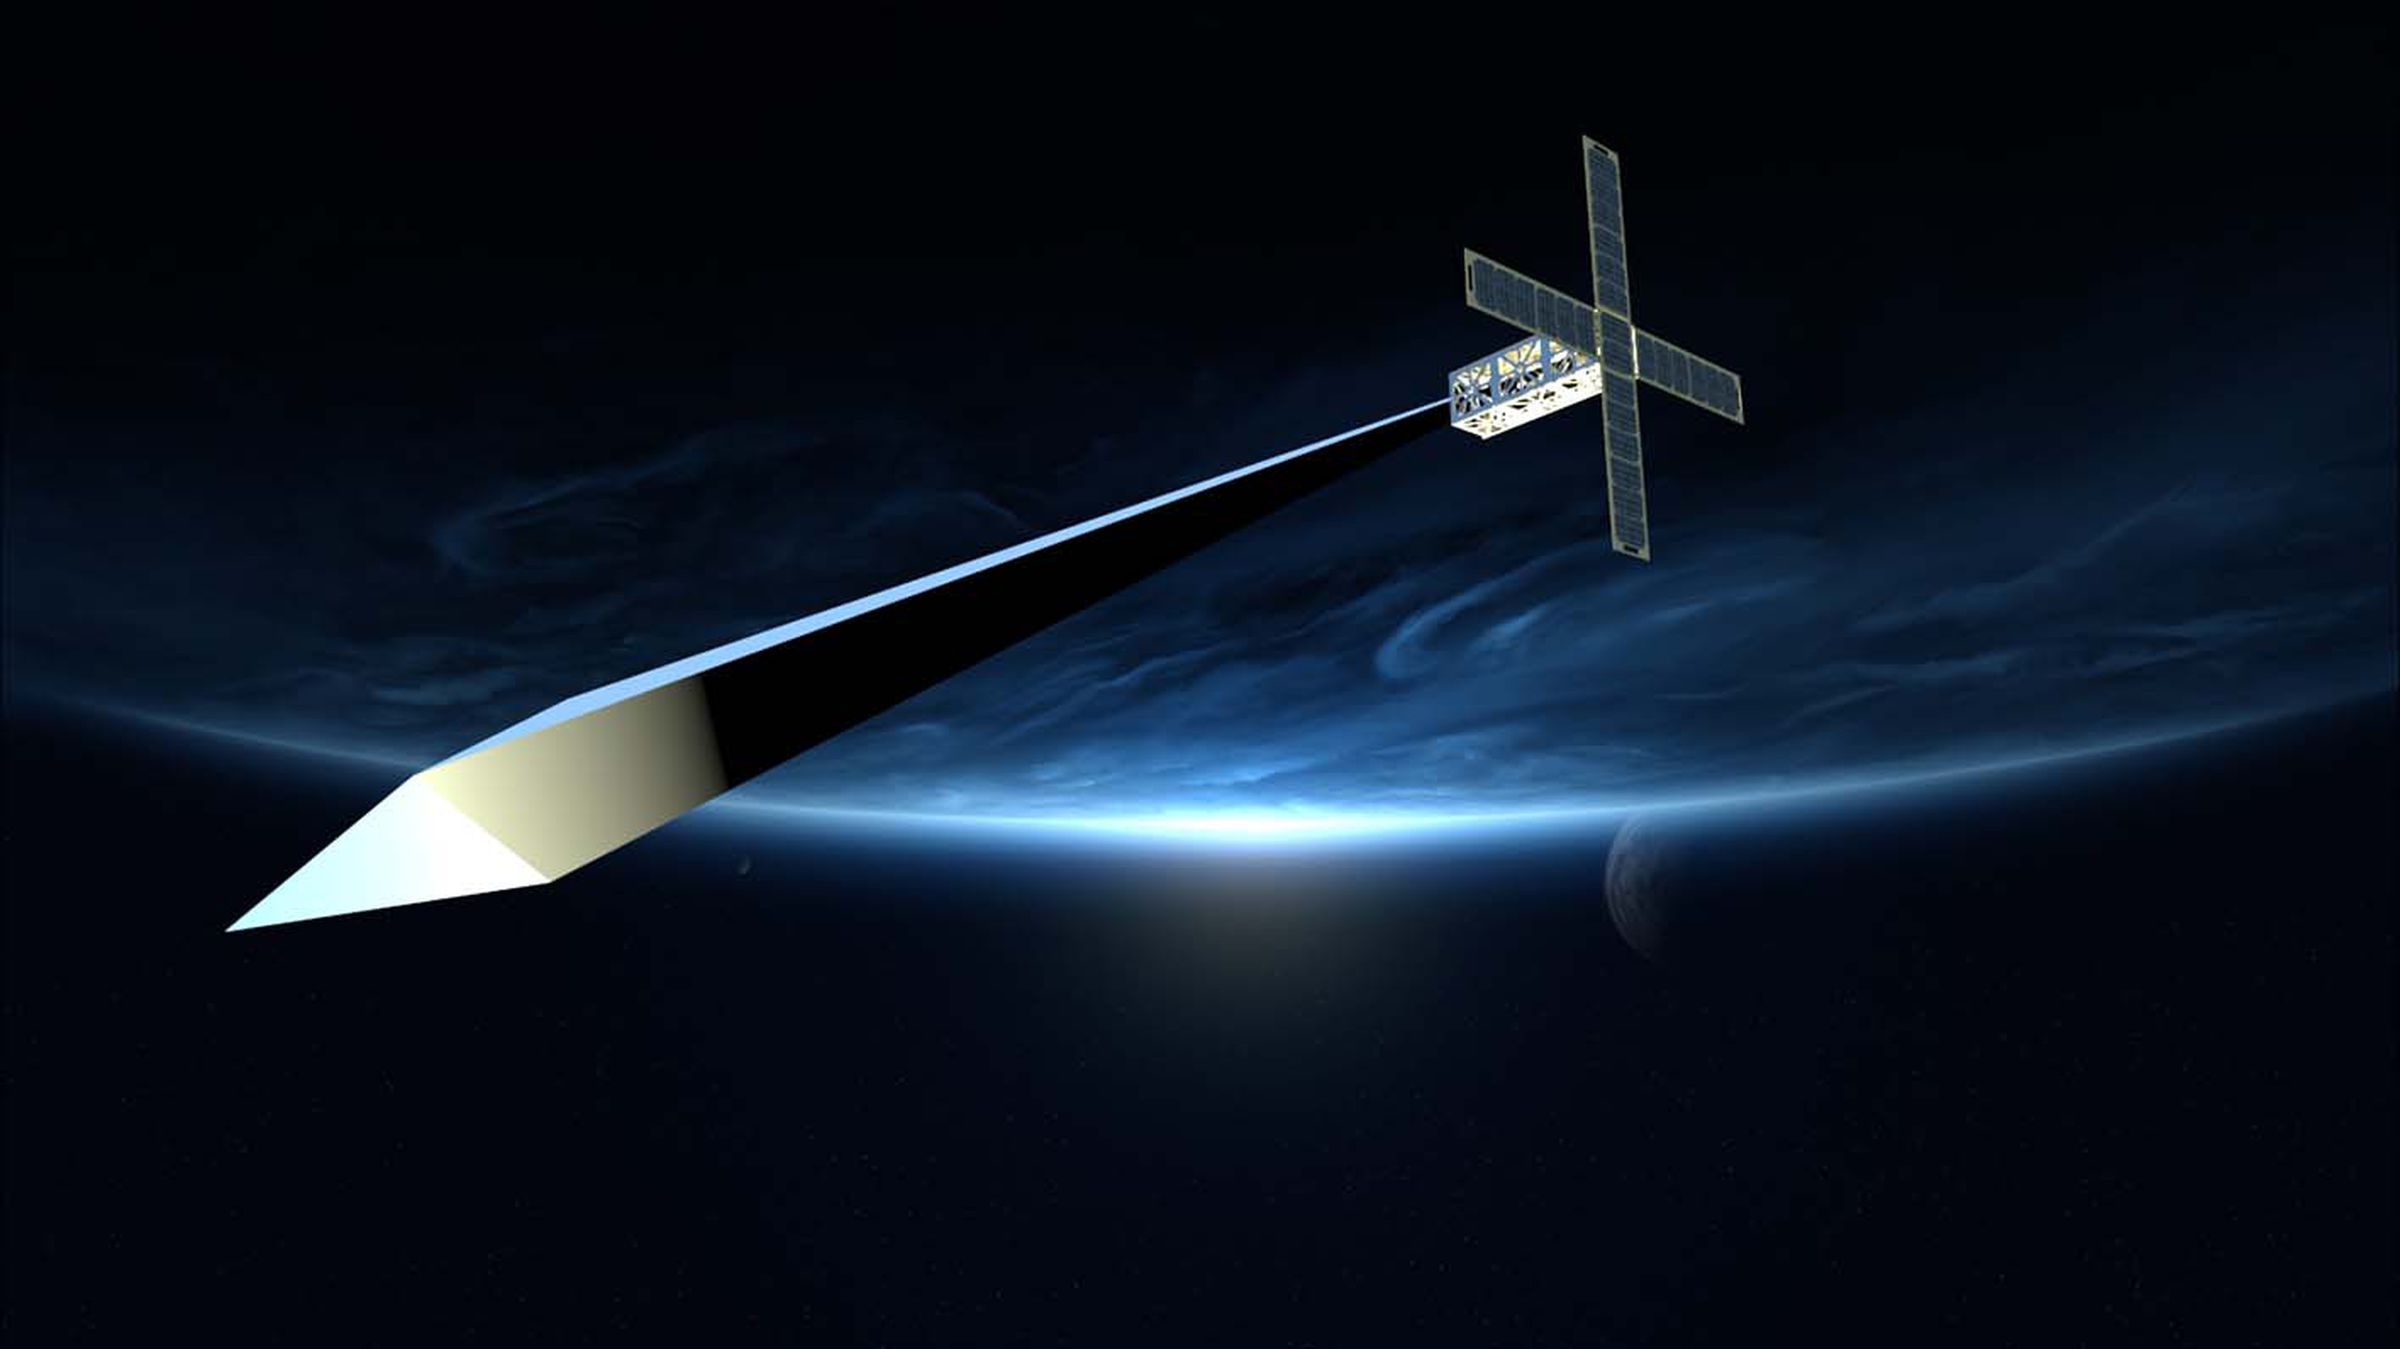 An artistic rendering of what the fully deployed Orbital Reflector satellite would look like